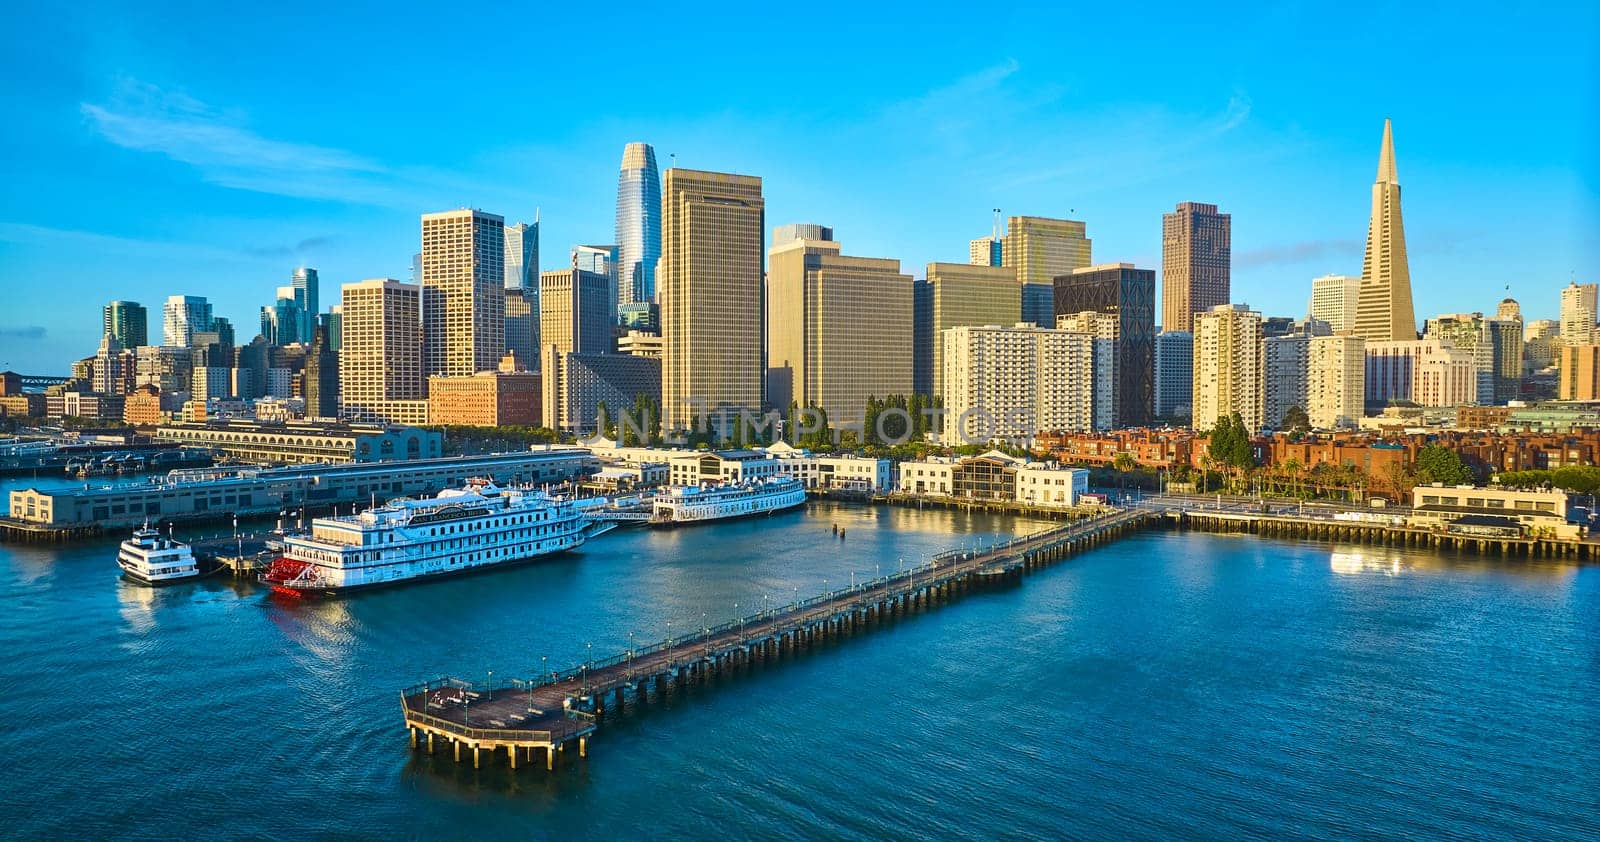 Image of Aerial Pier 7 at sunrise with San Francisco skyscraper skyline and boats docked in bay